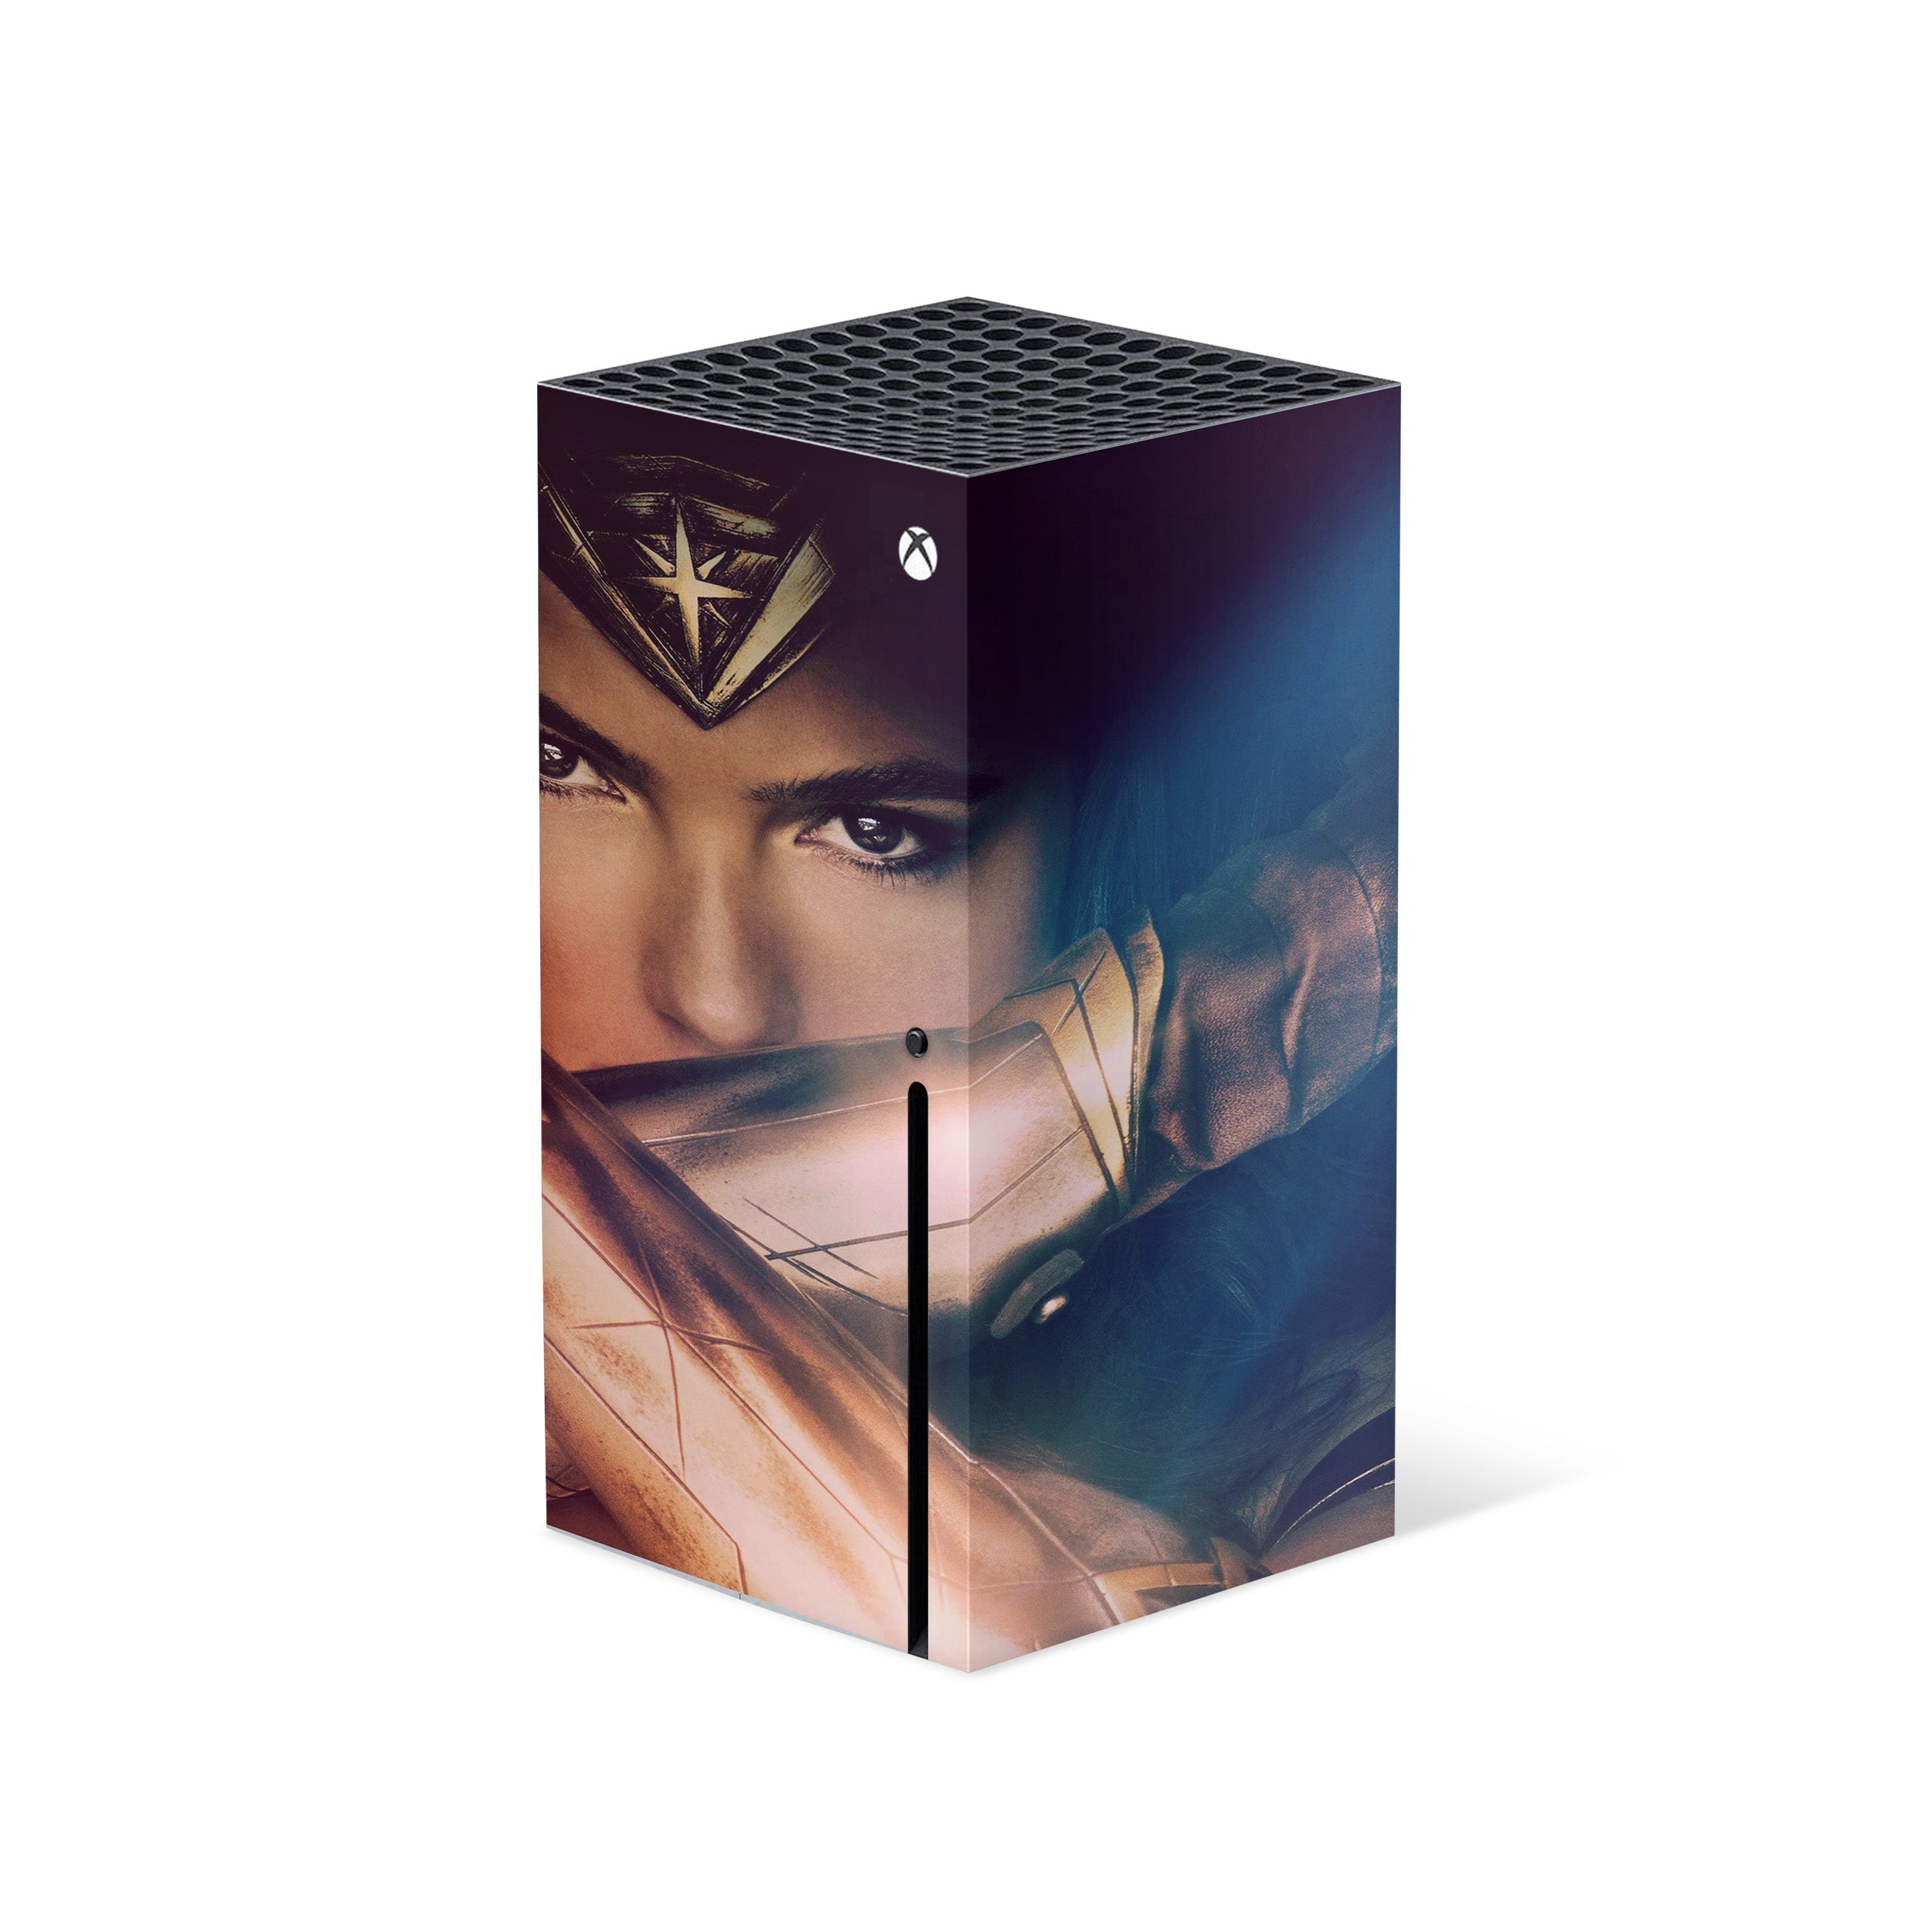 A video game skin featuring a DC Wonder Woman design for the Xbox Series X.